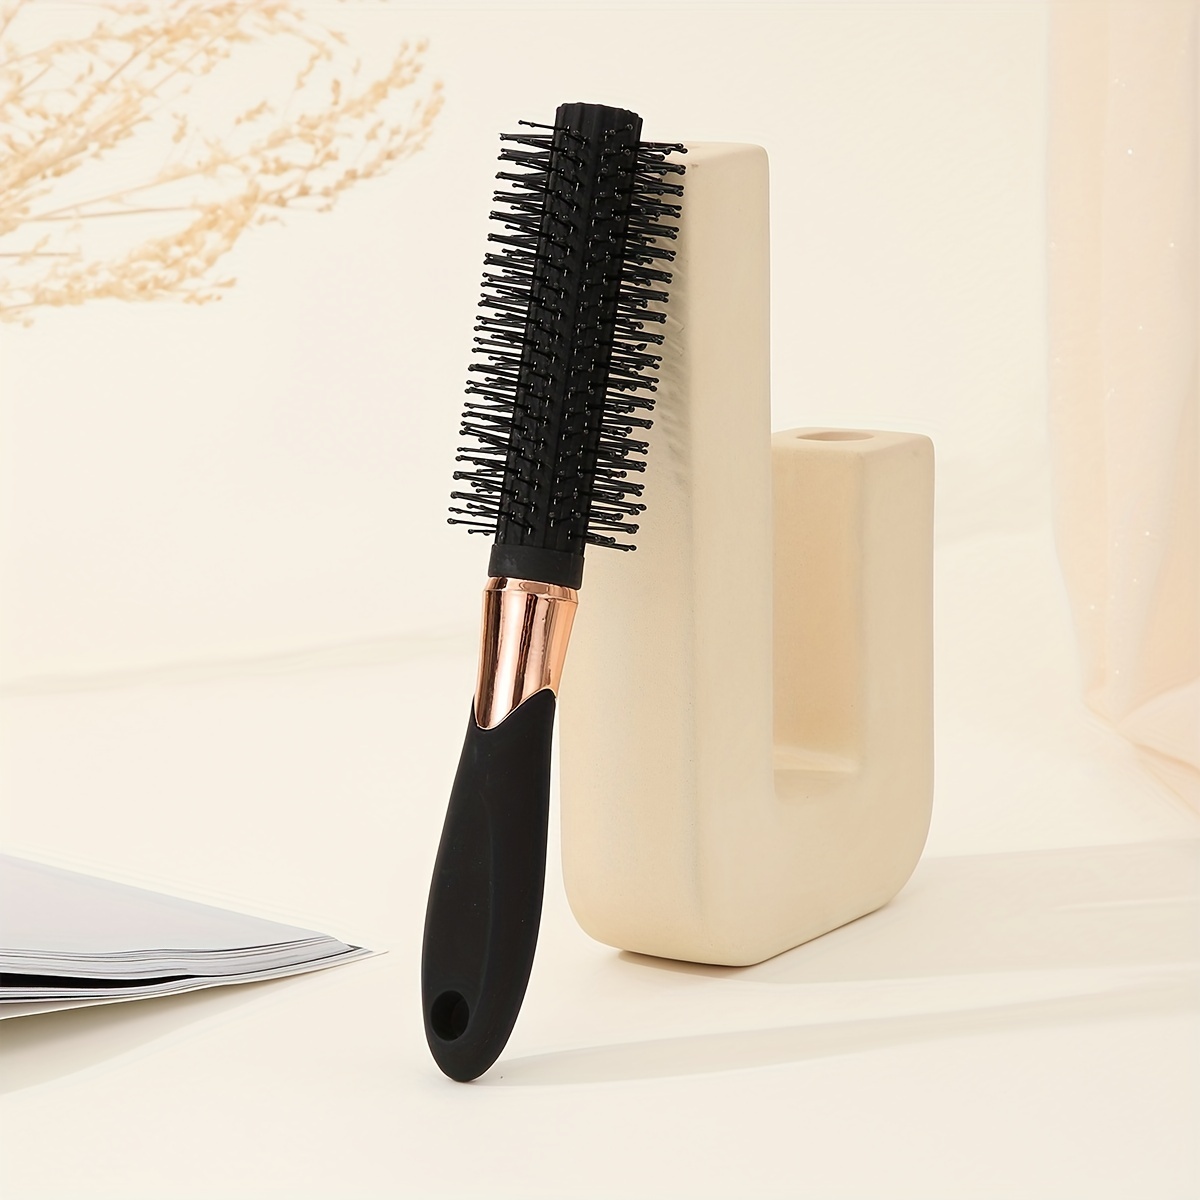 Buy Tiamo Salon Professional Flat Hair Brush With Wooden Handle Online at  Low Prices in India - Amazon.in